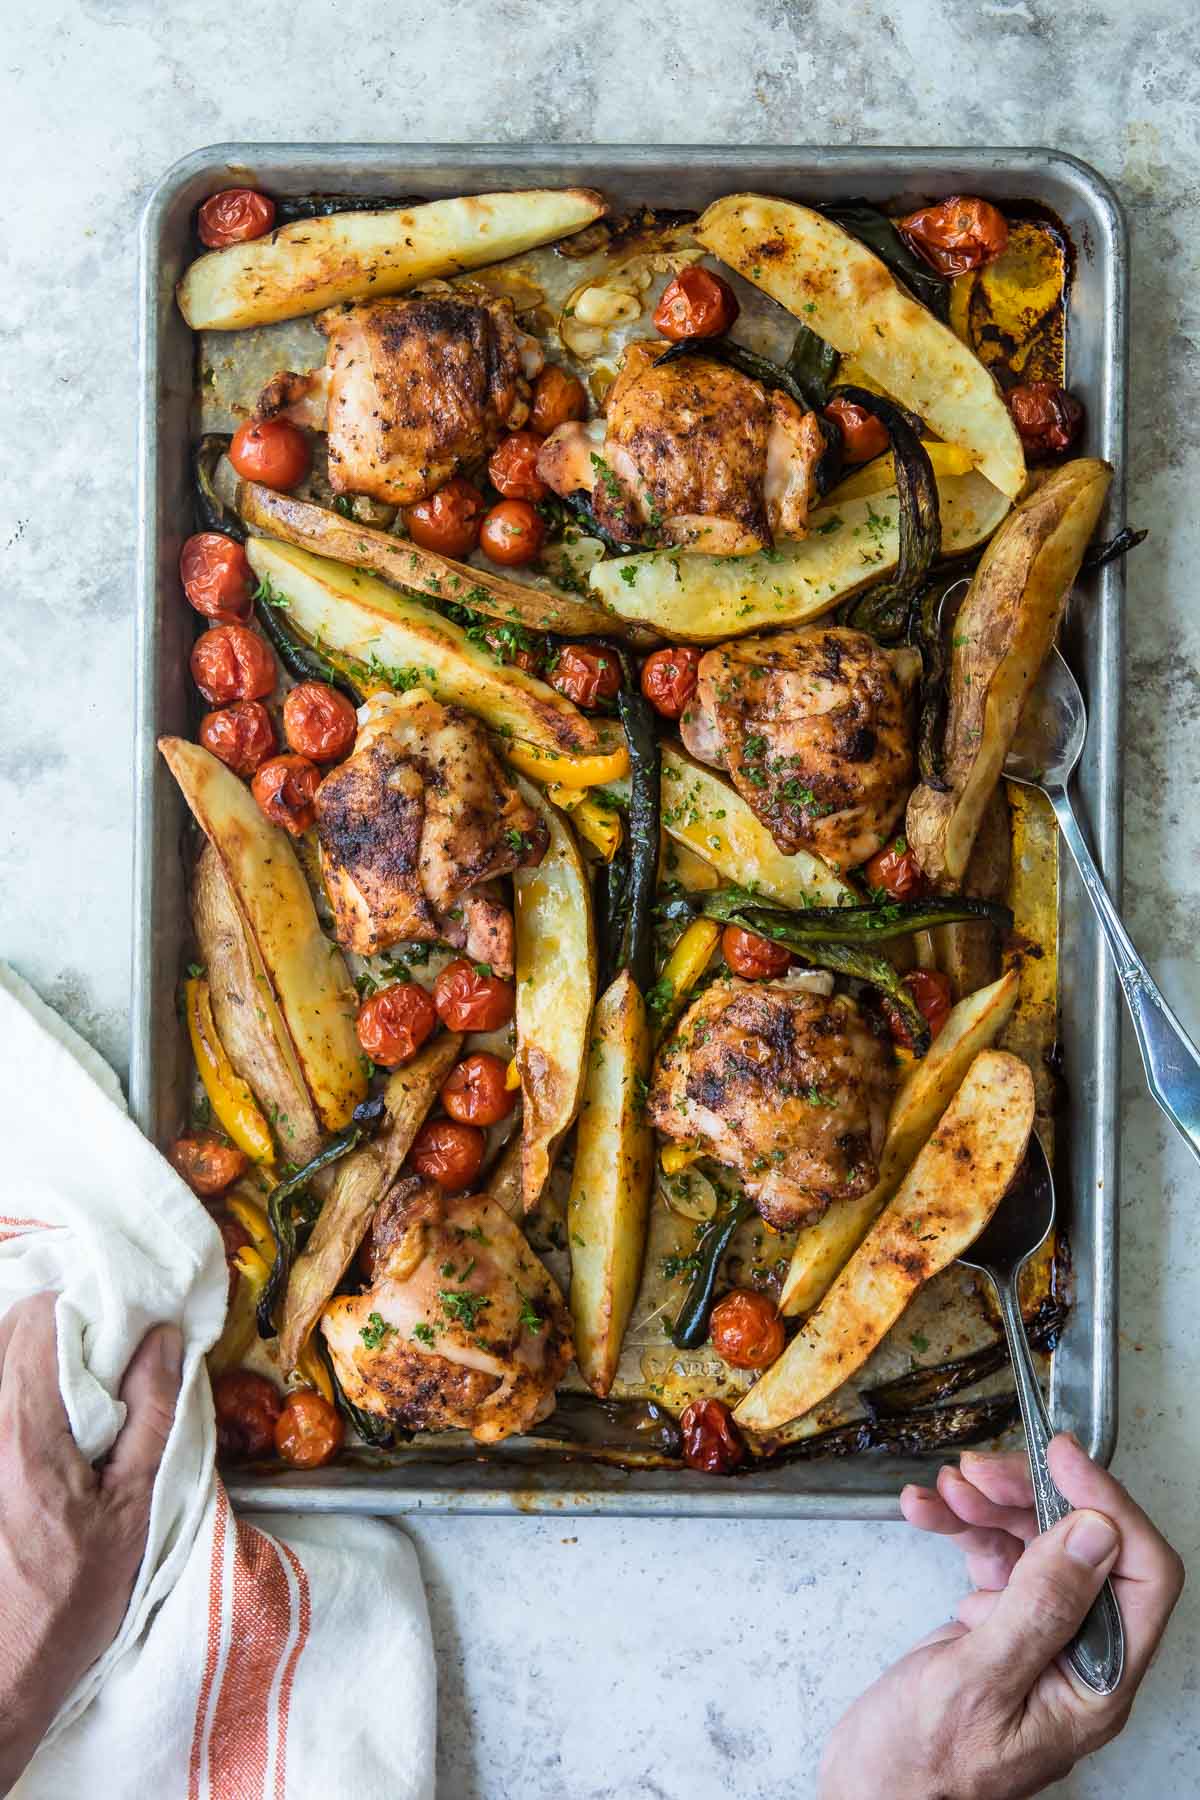 Paprika chicken and vegetables on a baking sheet.